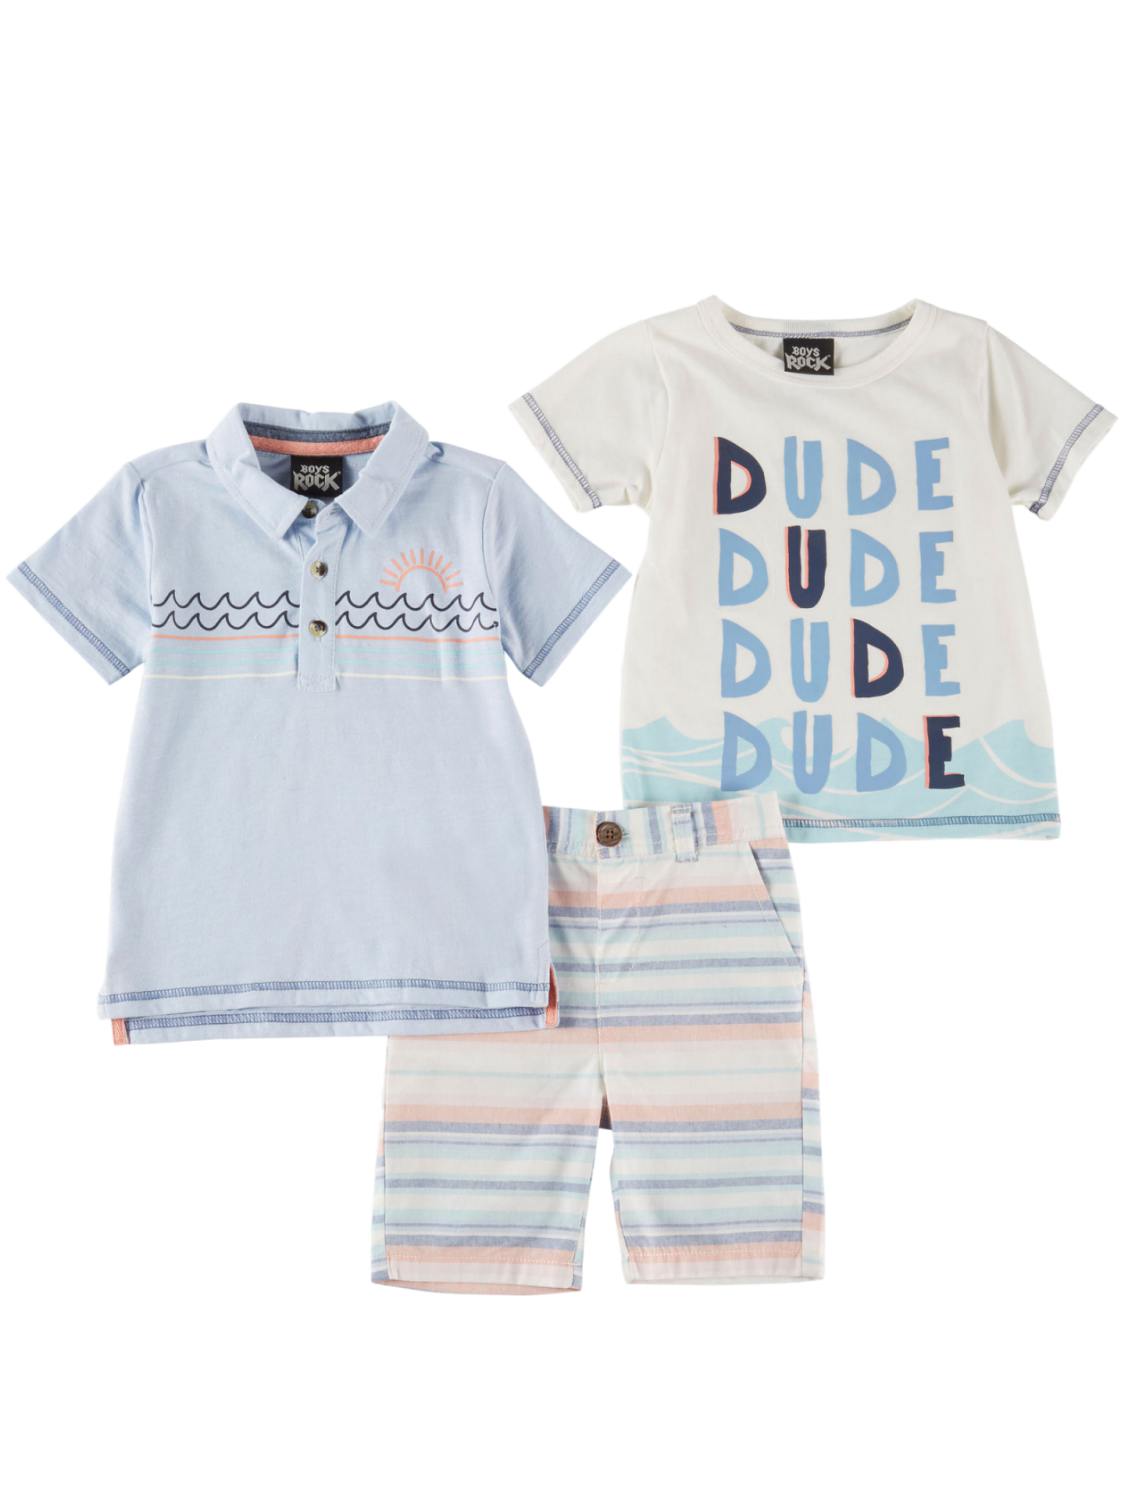 Carter's Boys Rock Infant & Toddler Boys Surf Shirts & Shorts Dude Baby Outfit Set